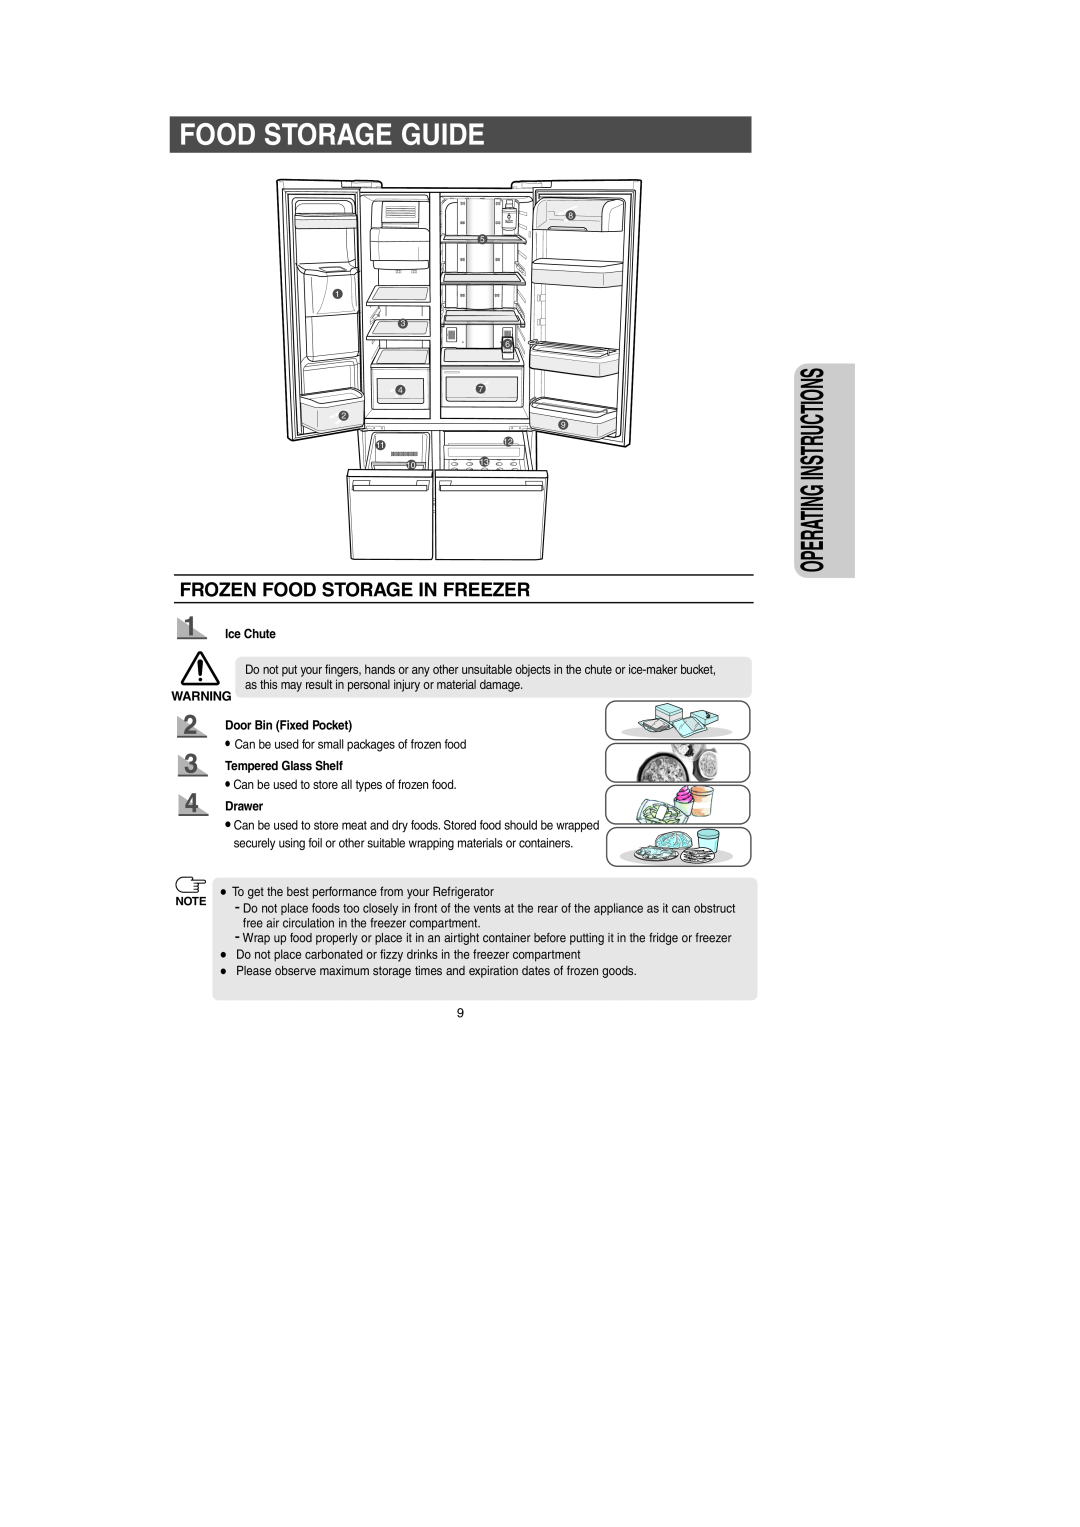 Samsung RM257AB*, RM255AB* Food Storage Guide, Frozen Food Storage In Freezer, Operating Instructions, Ice Chute, Drawer 